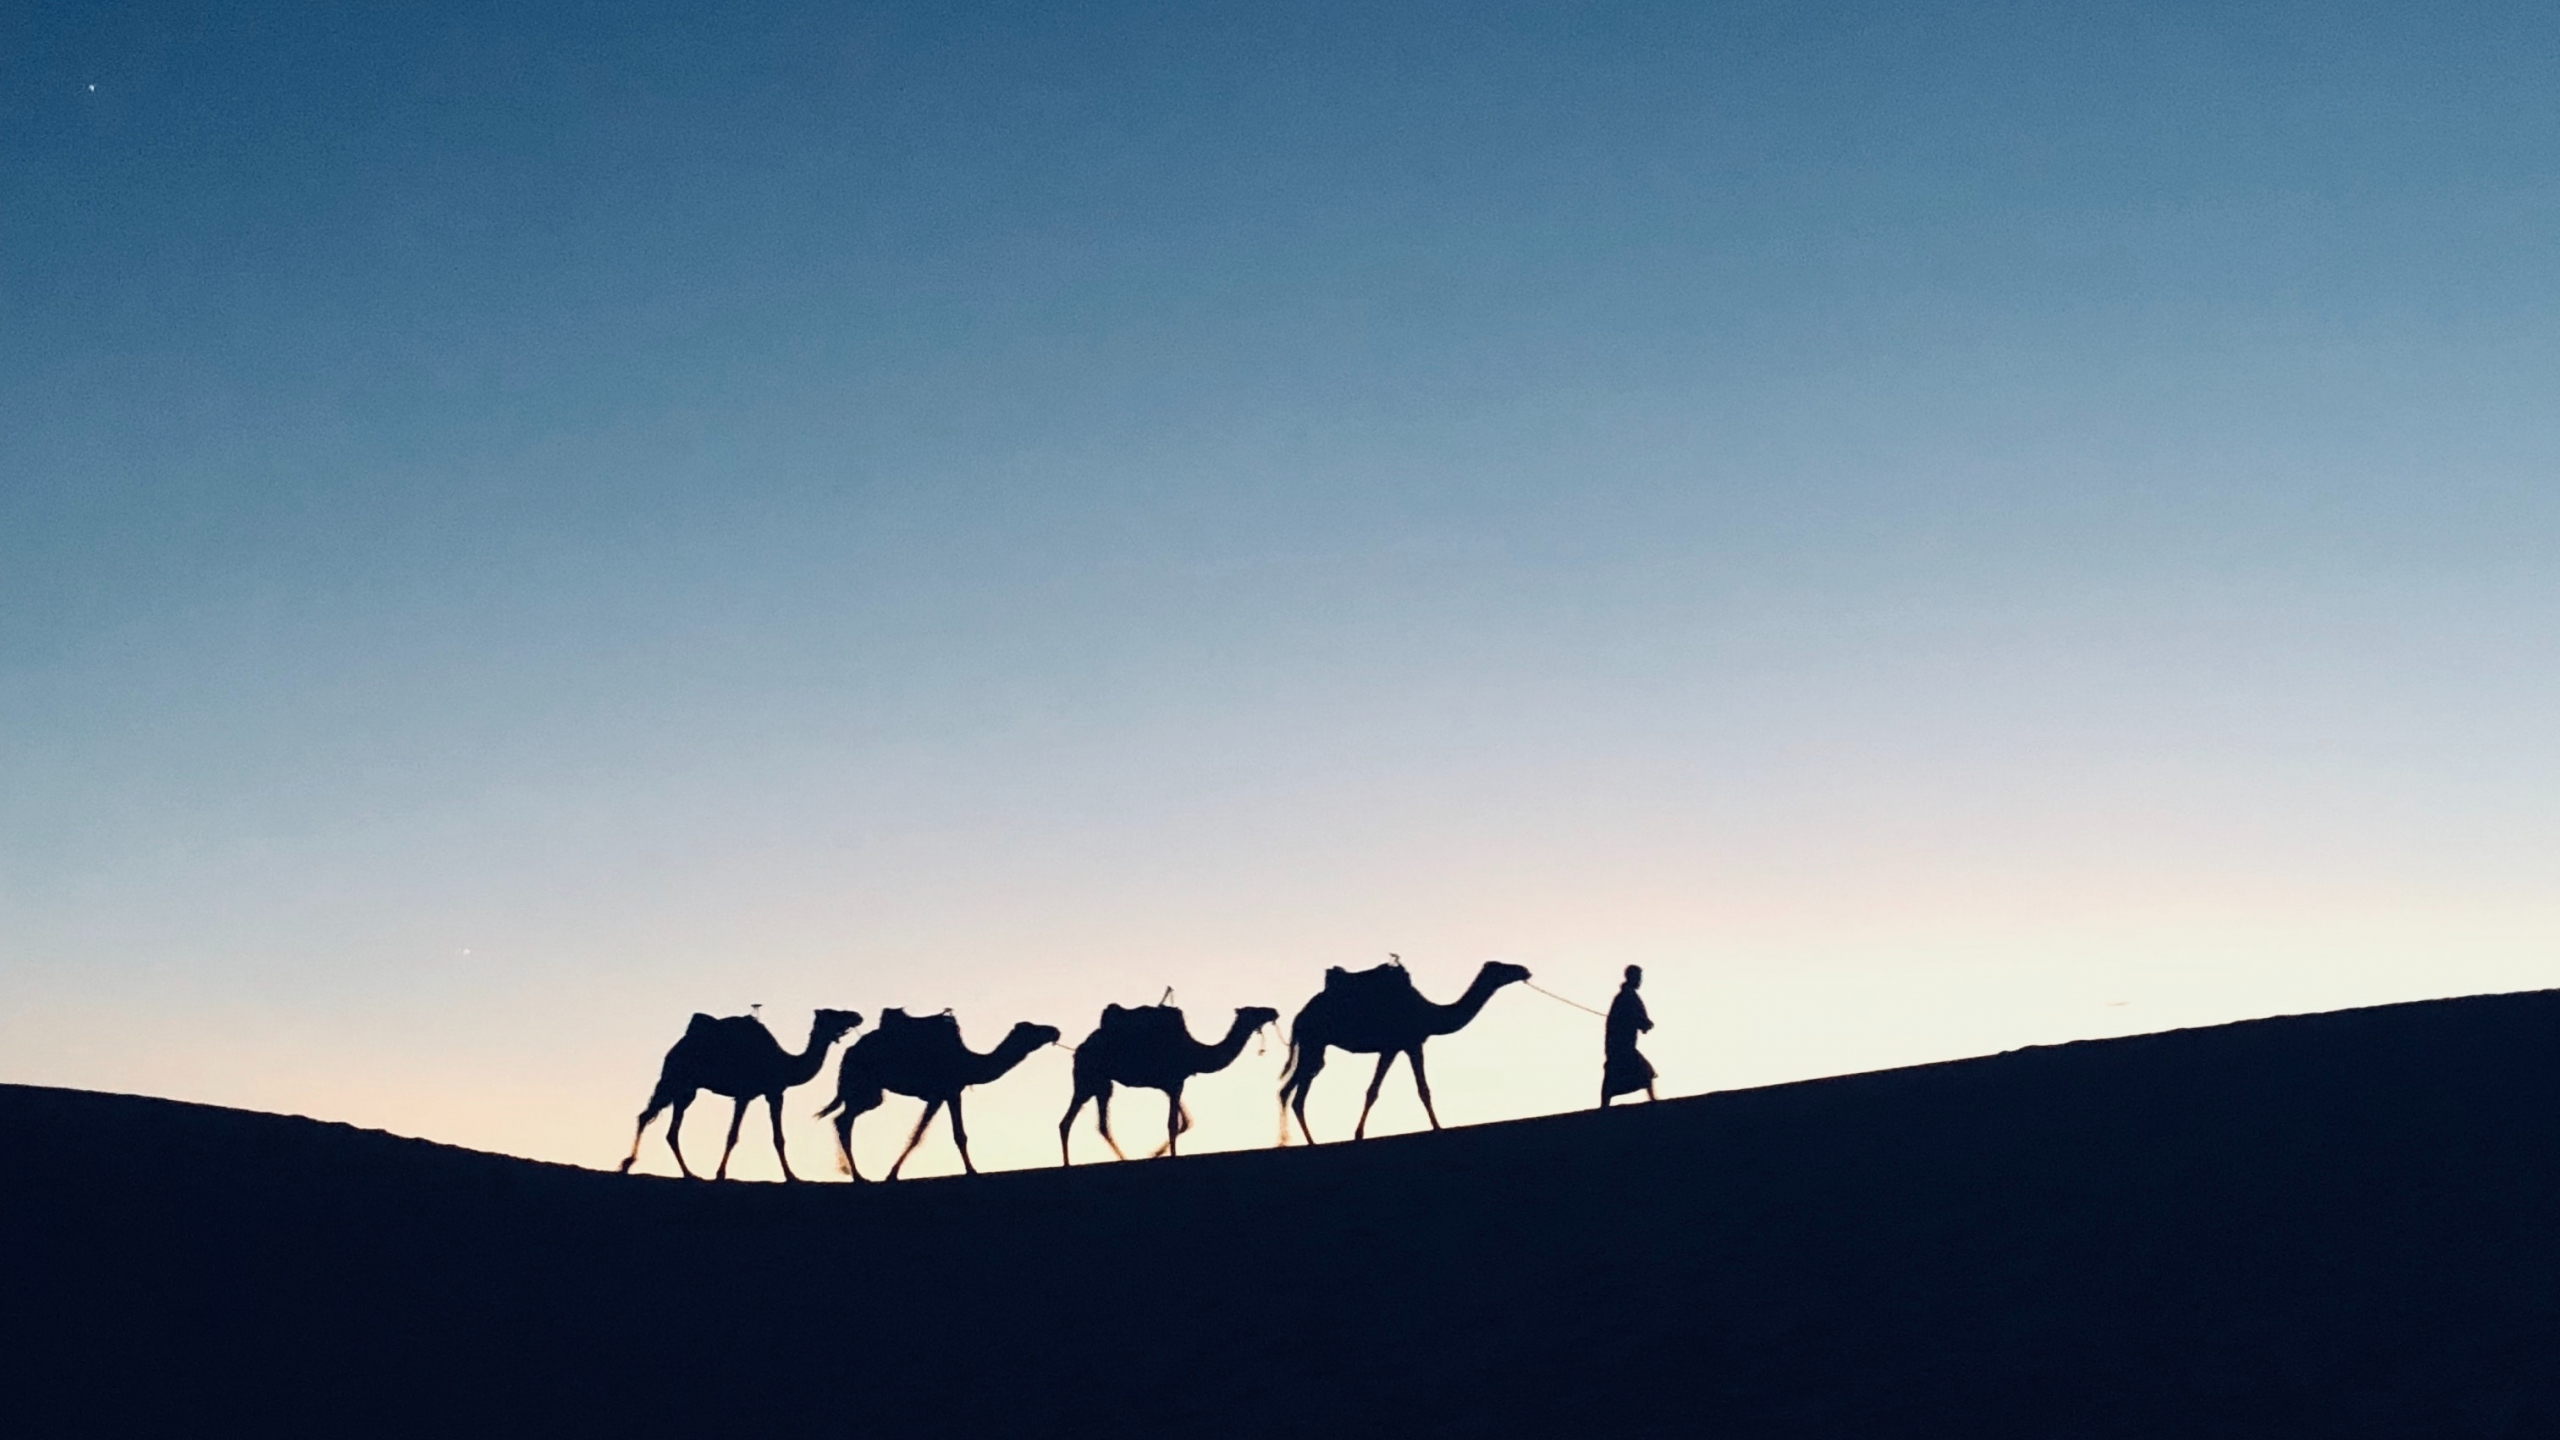 Silhouette, sunset, camel, Morocco, 2560x1440 wallpaper